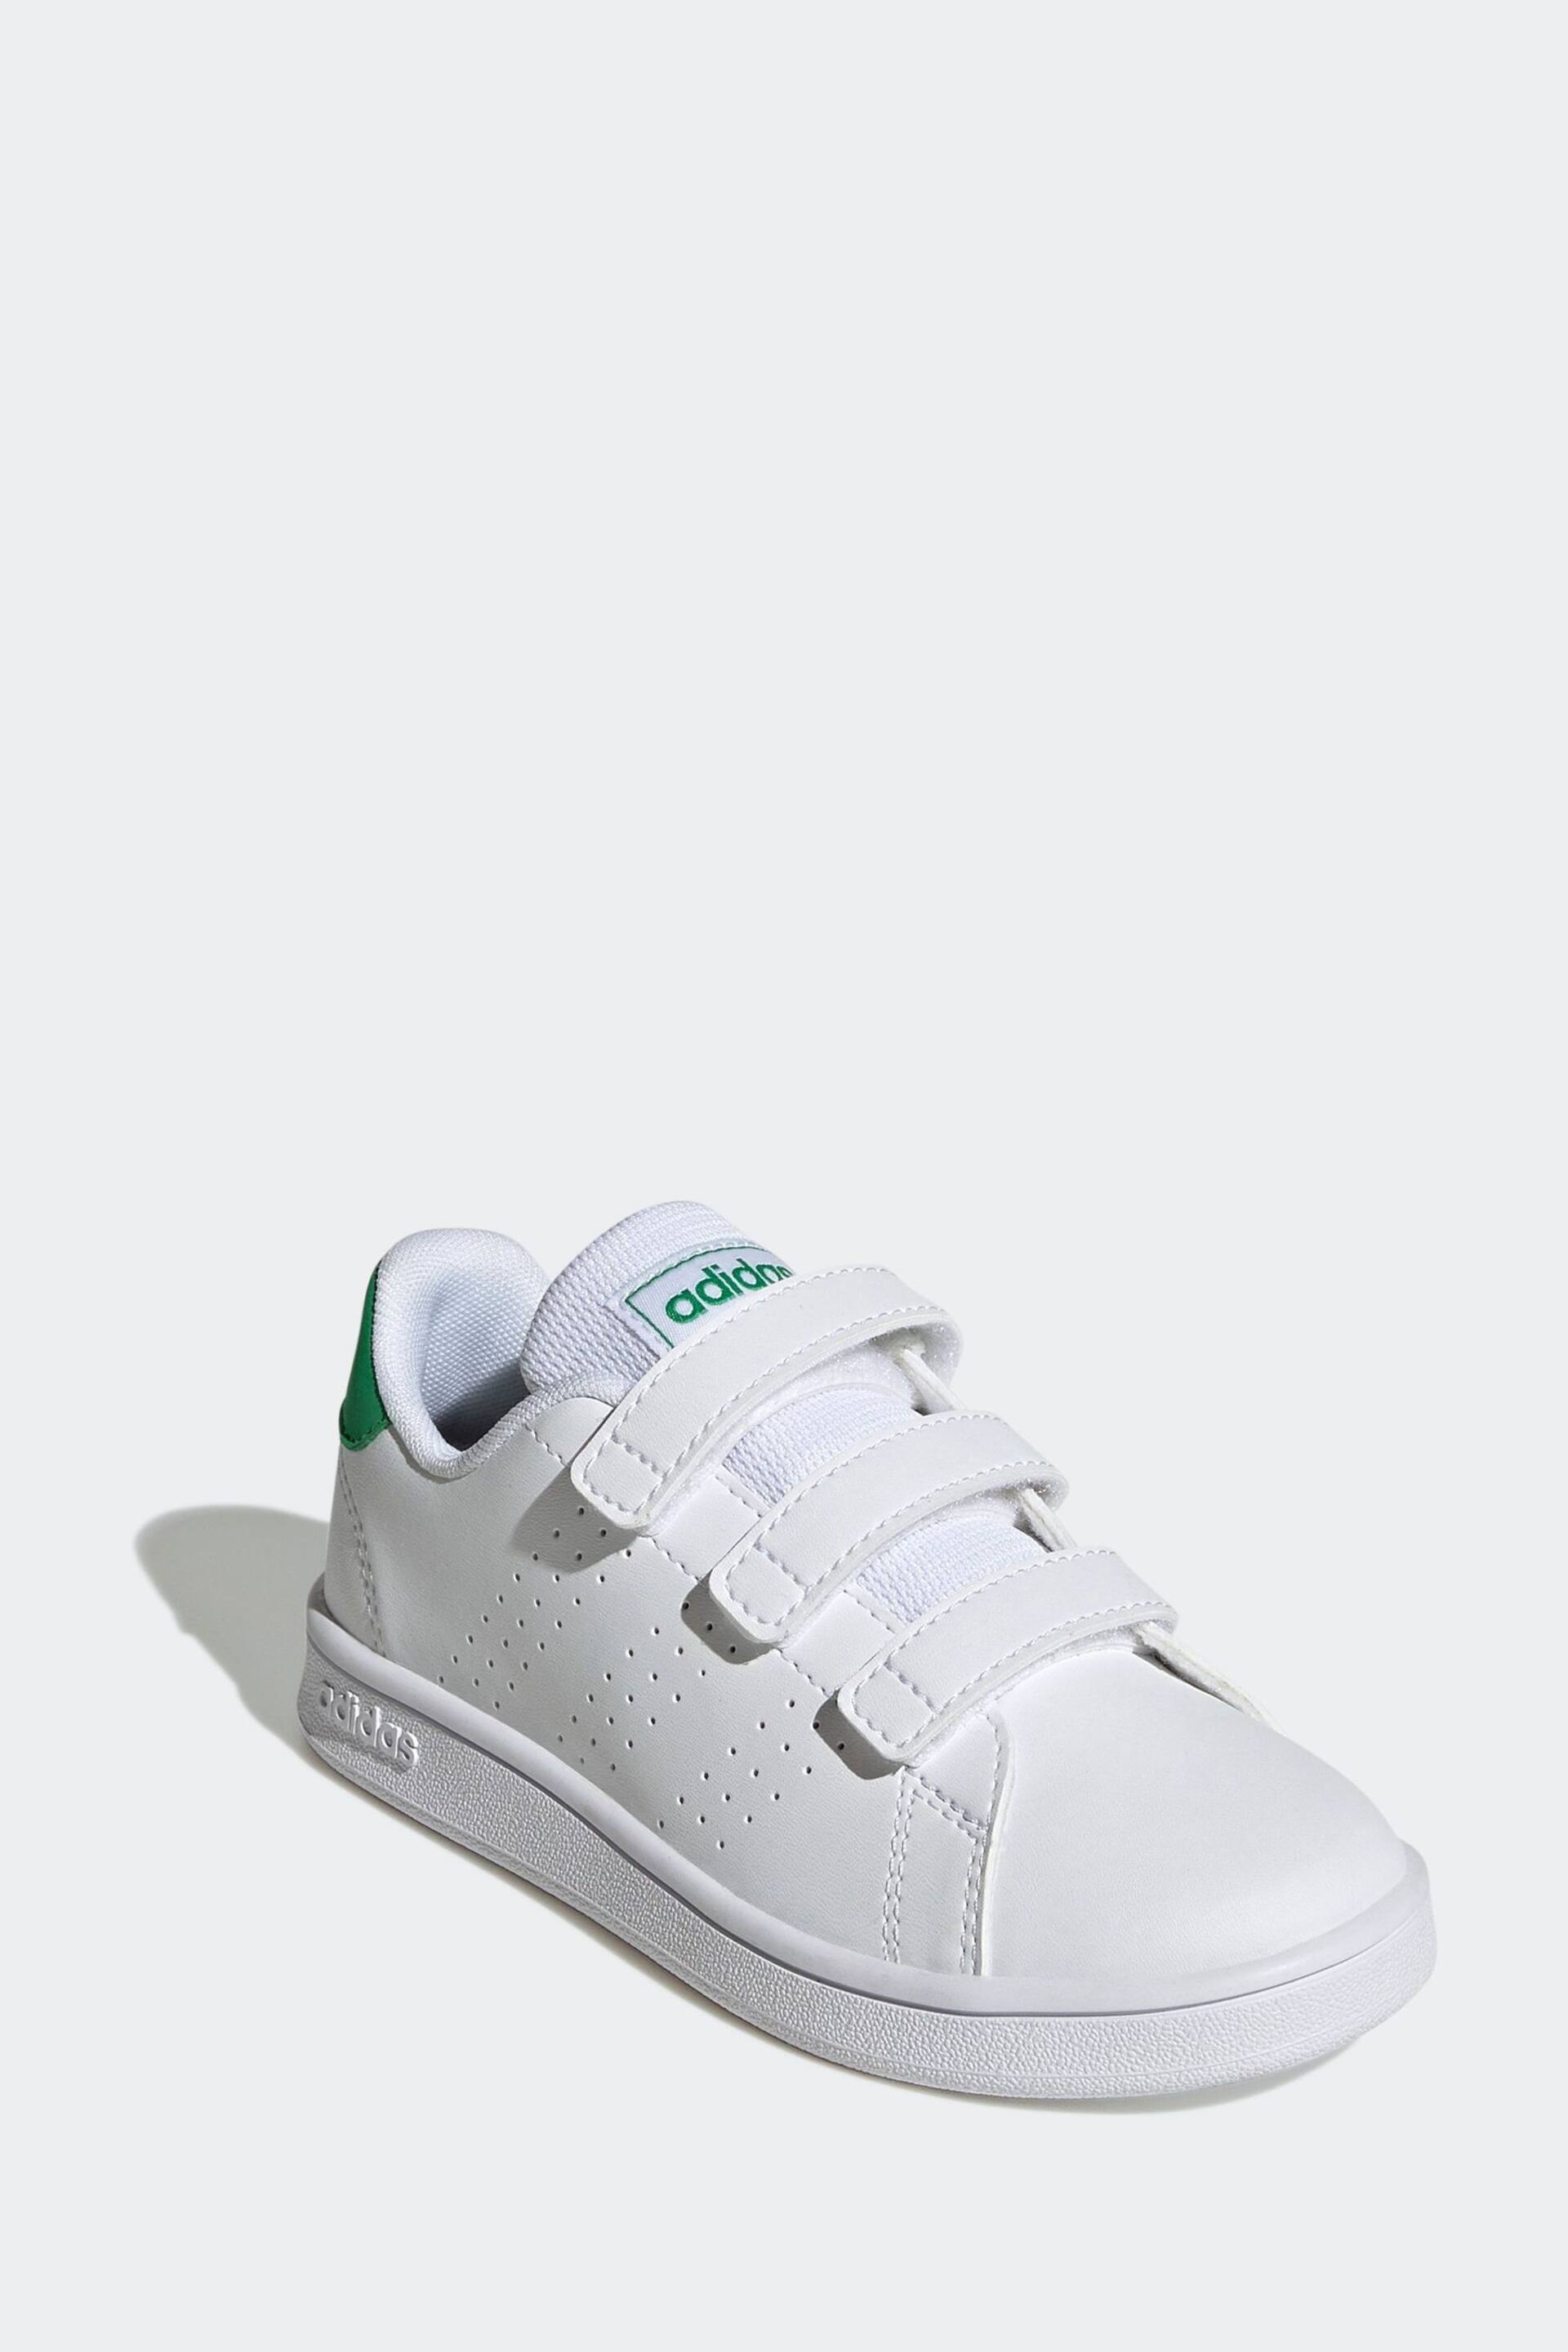 adidas Green/White Sportswear Advantage Court Lifestyle Hook And Loop Trainers - Image 4 of 9